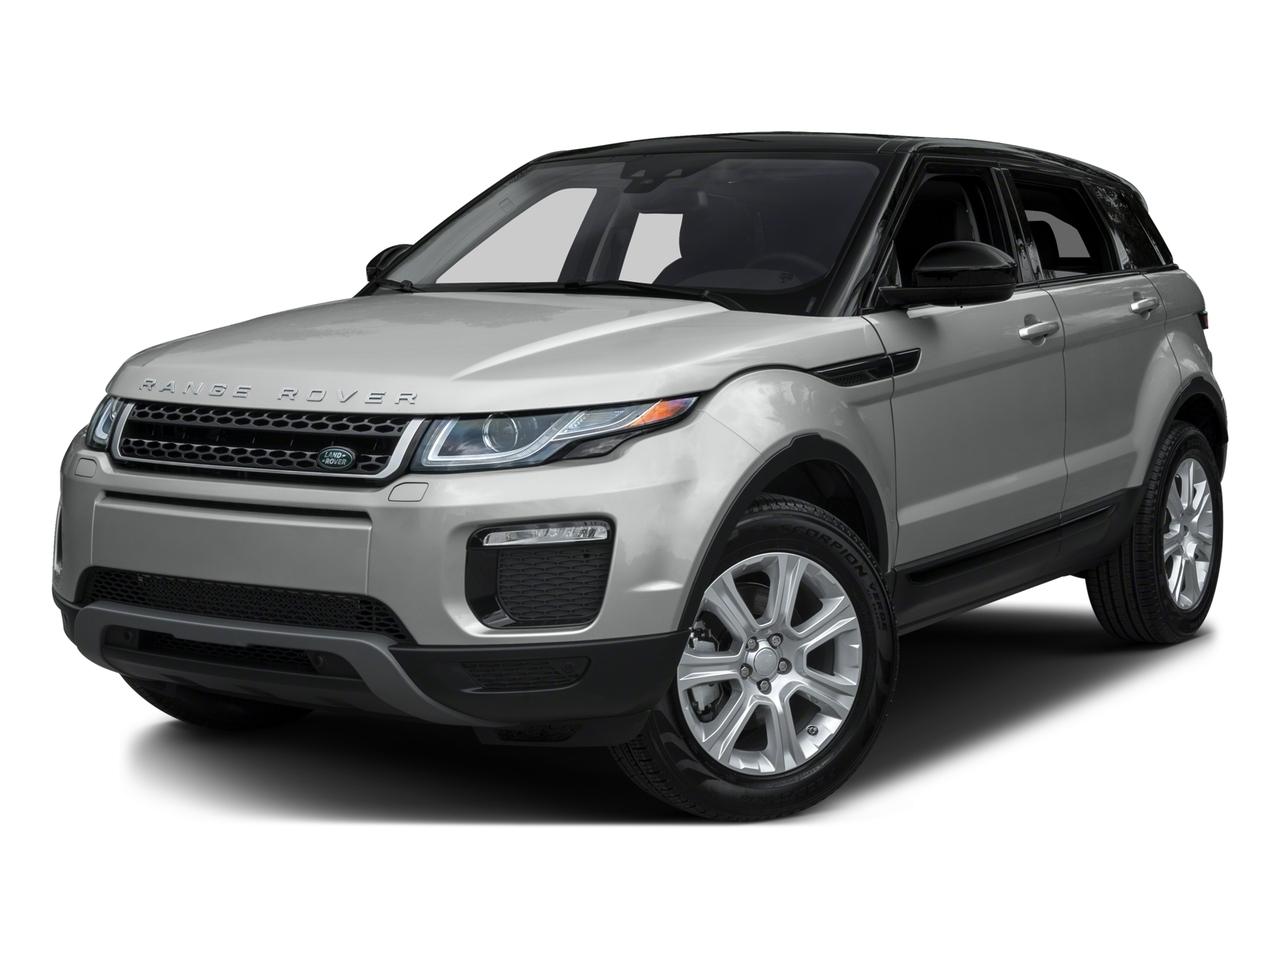 2016 Land Rover Range Rover Evoque Vehicle Photo in Plainfield, IL 60586